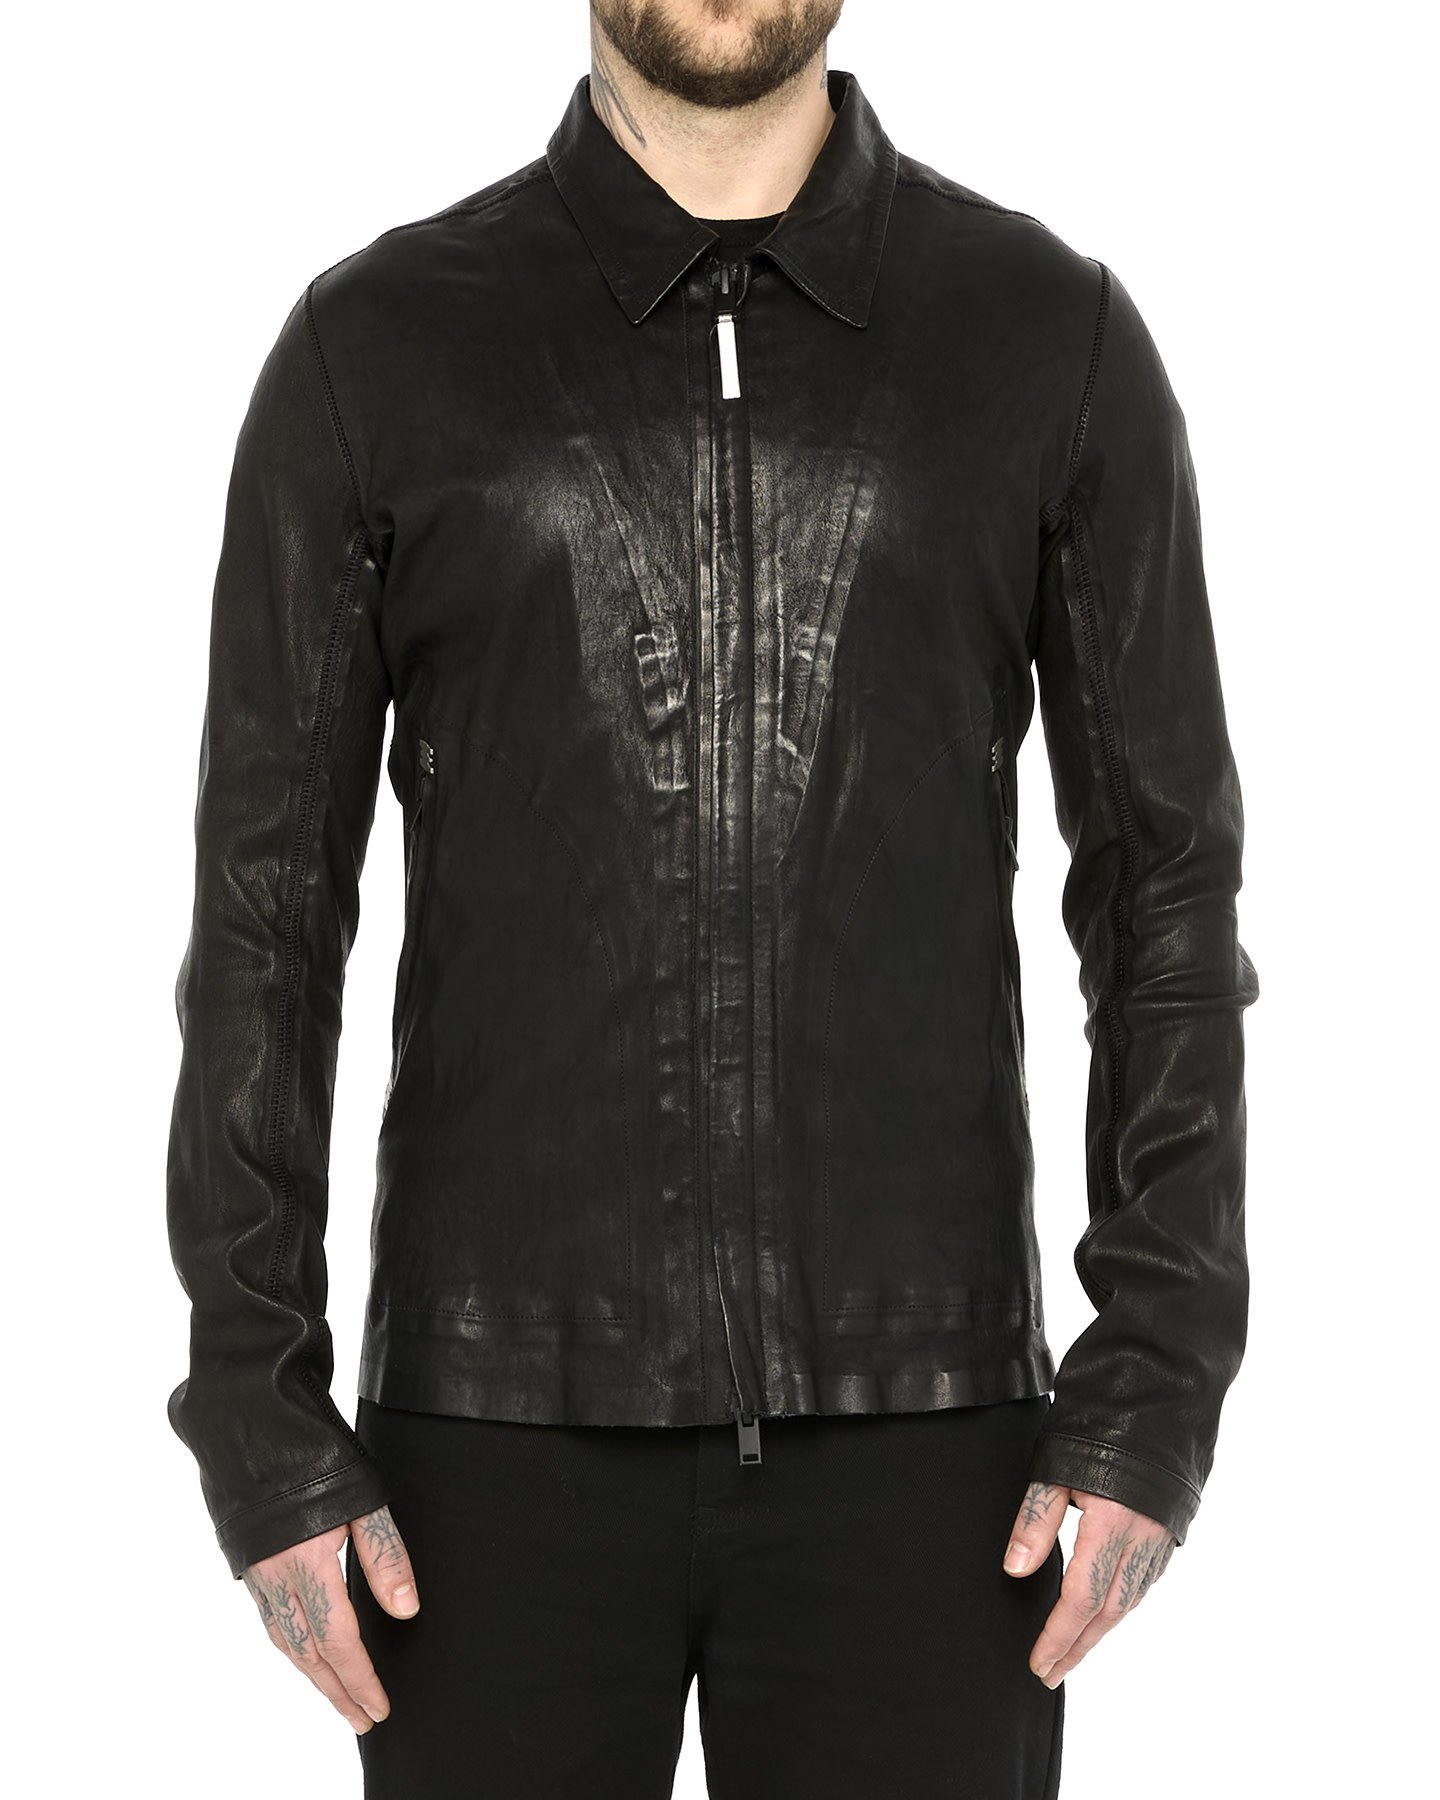 ATTENTIF STRETCH LEATHER ZIP FRONT COLLARED JACKET